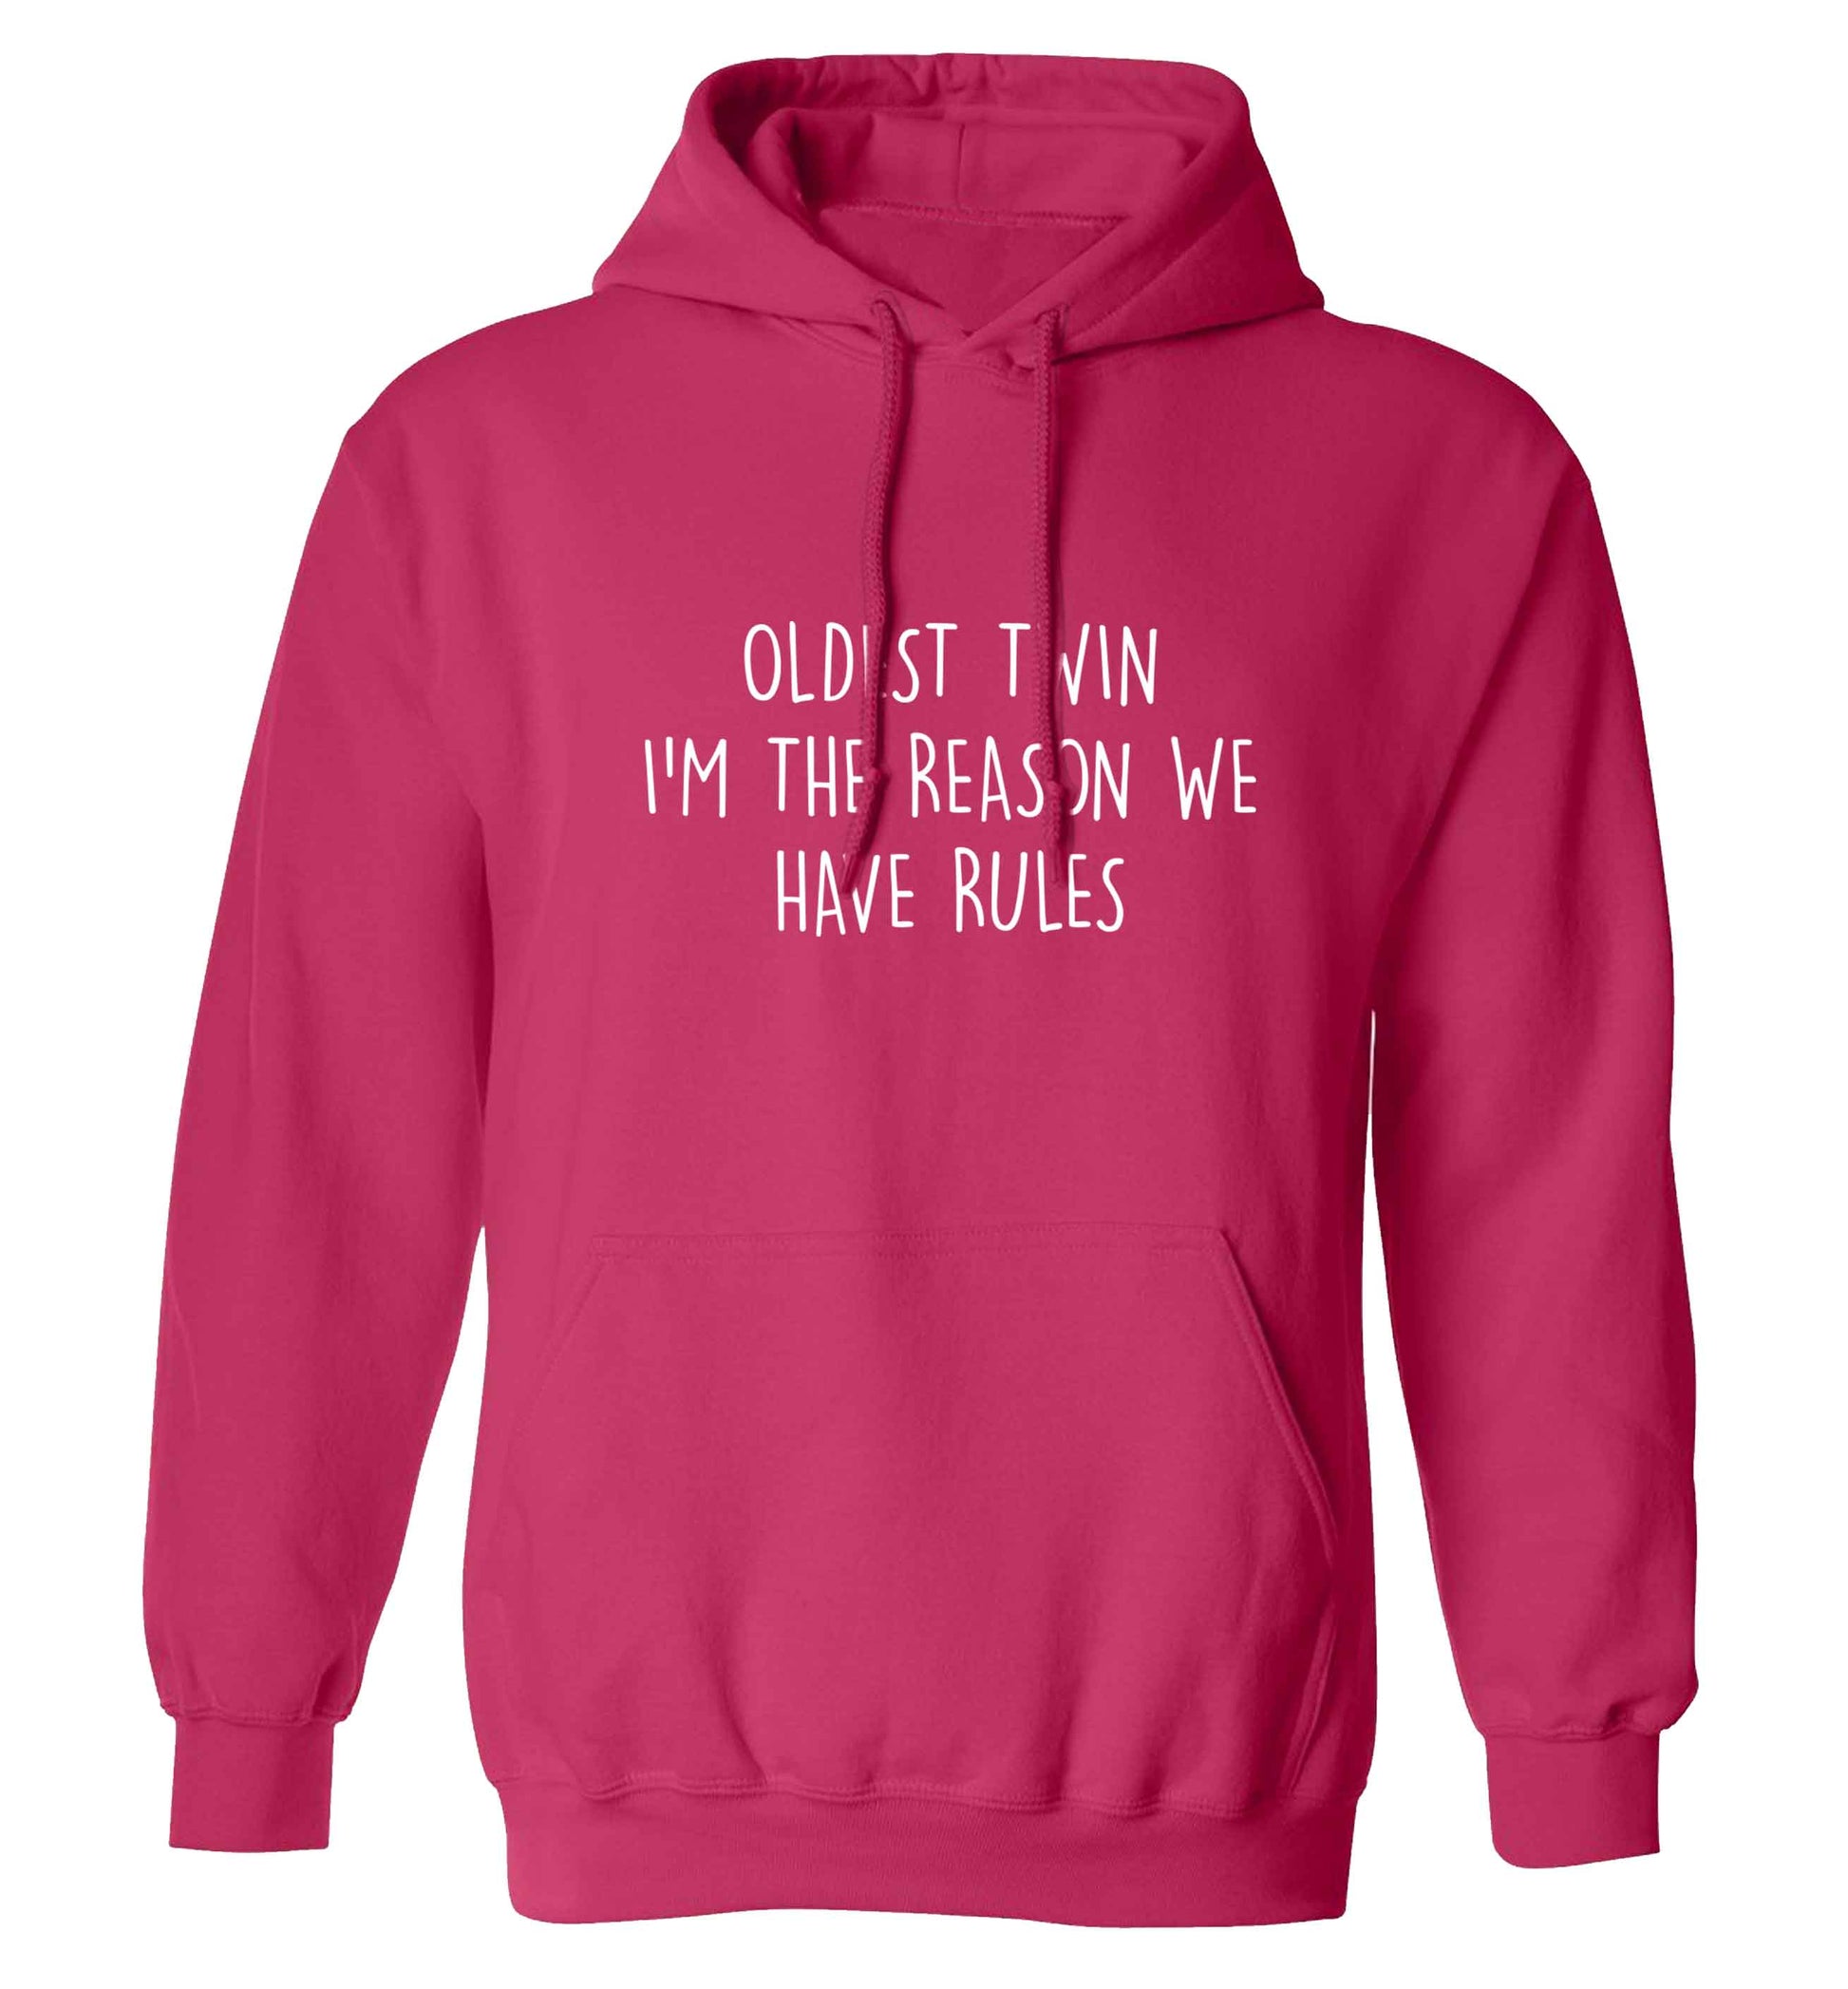 Oldest twin I'm the reason we have rules adults unisex pink hoodie 2XL